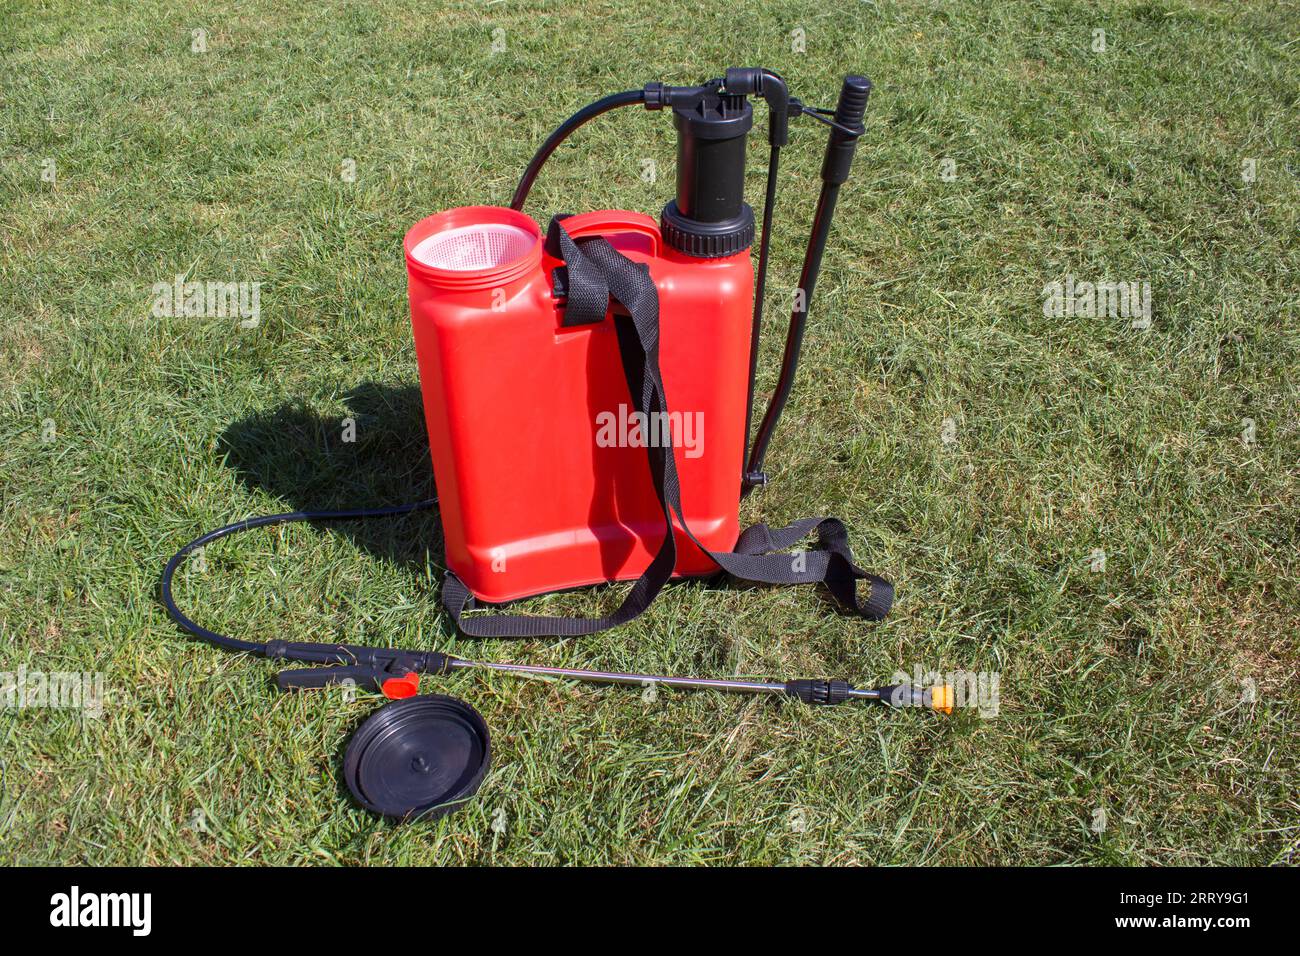 on the grass is an open sprayer for spraying herbicides Stock Photo